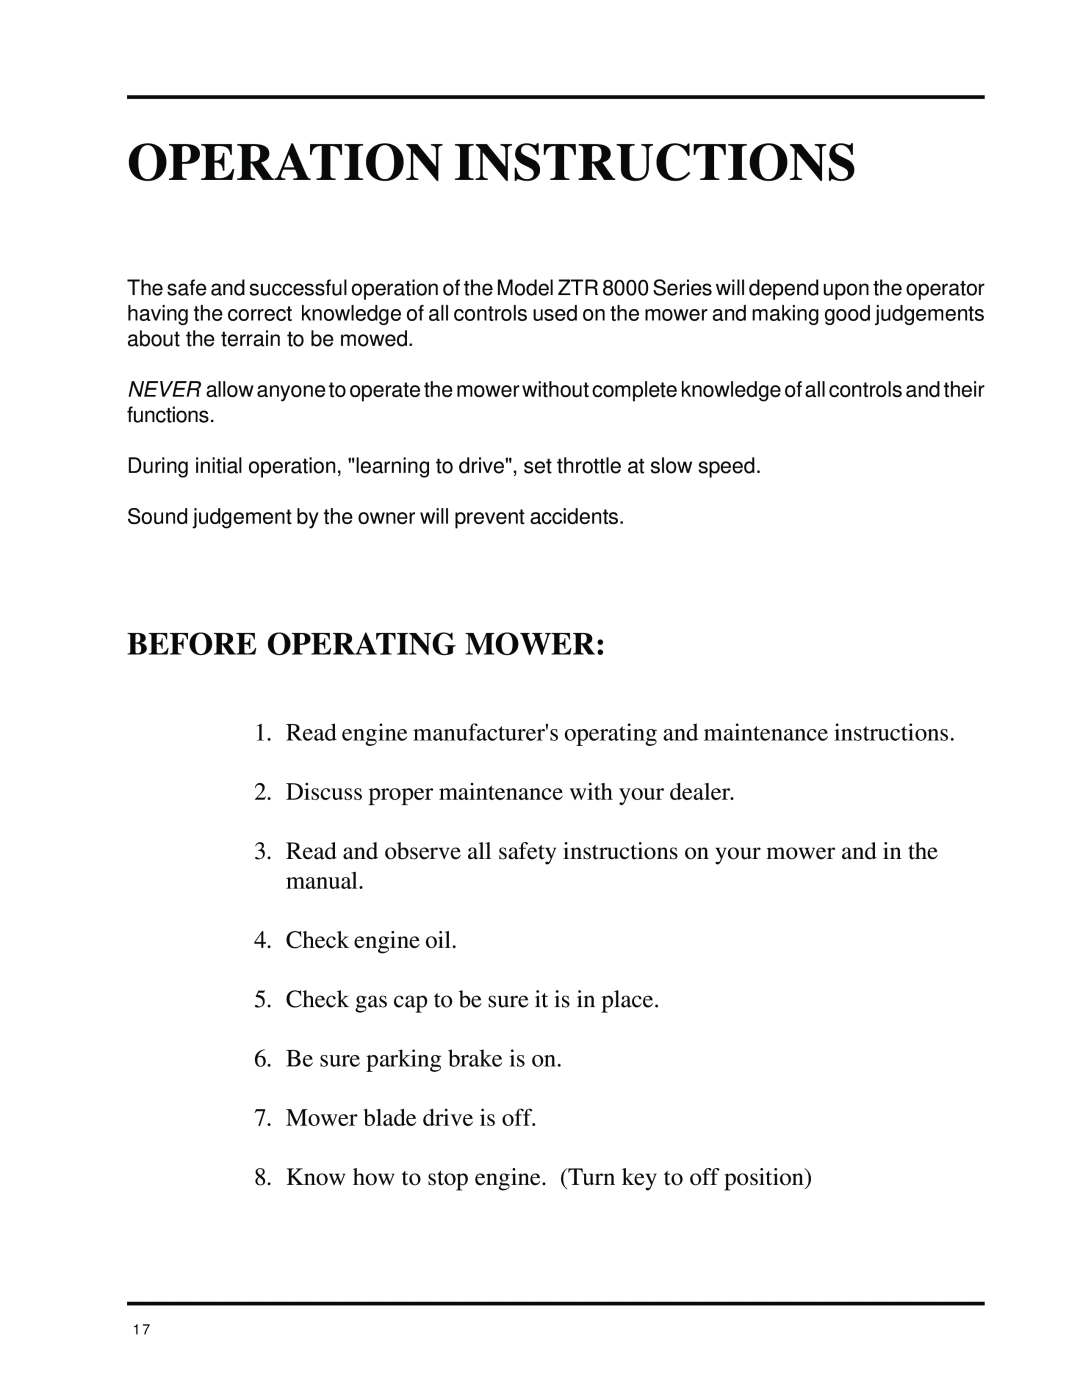 Dixon 8000 Series manual Operation Instructions, Before Operating Mower 